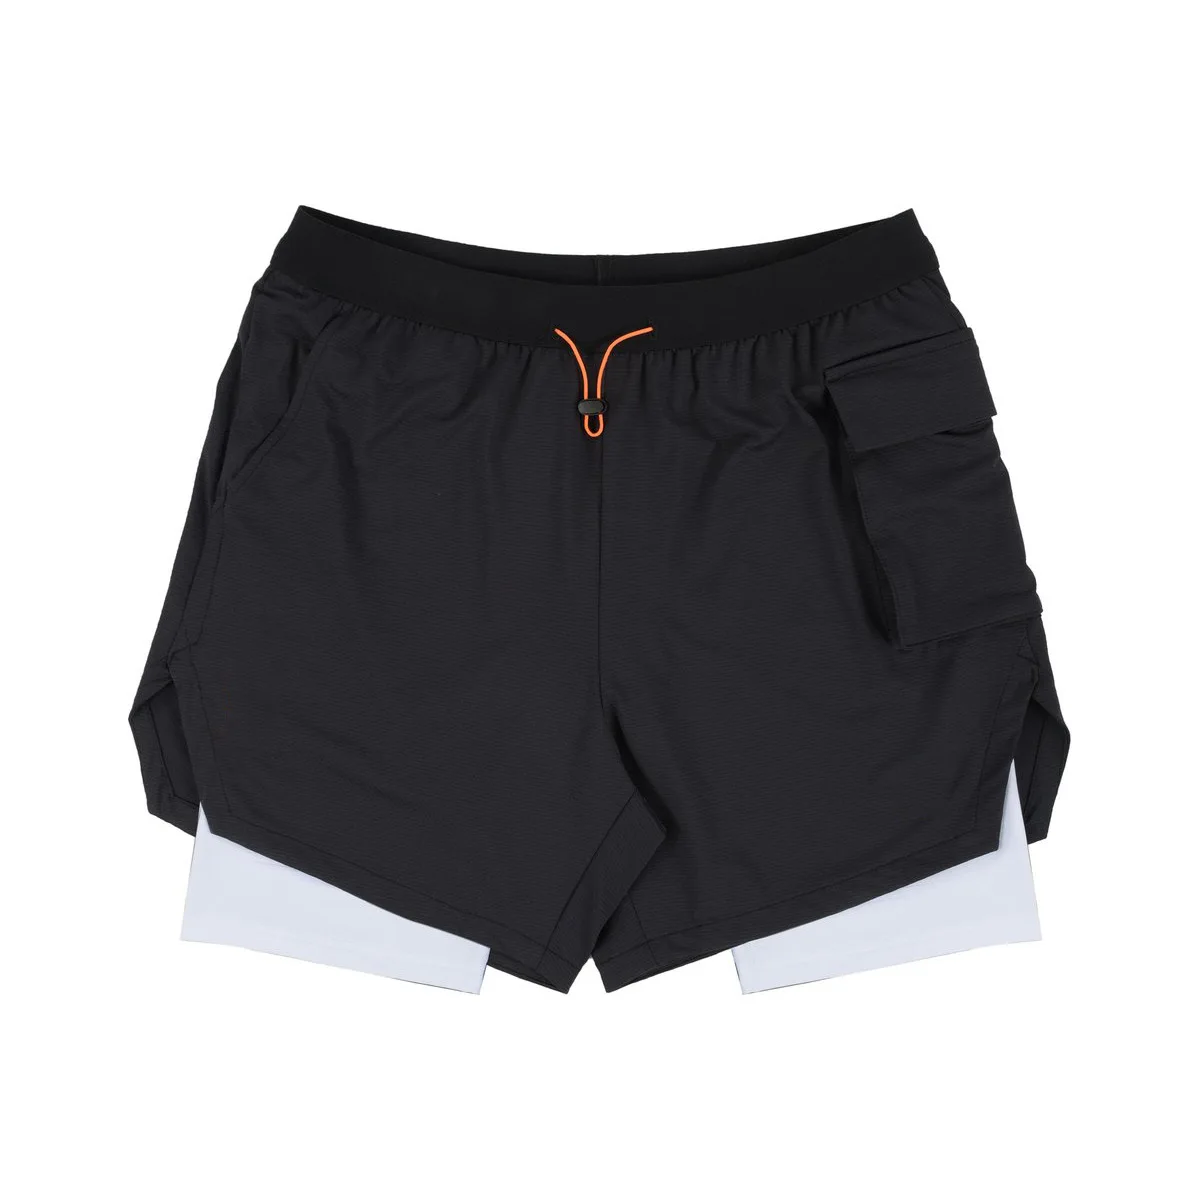 2 in 1 Fitness Shorts Men Double Layer Casual Bermuda Summer Gym Bodybuilding Training Short Pants Male Running Sport Bottoms best men's casual shorts